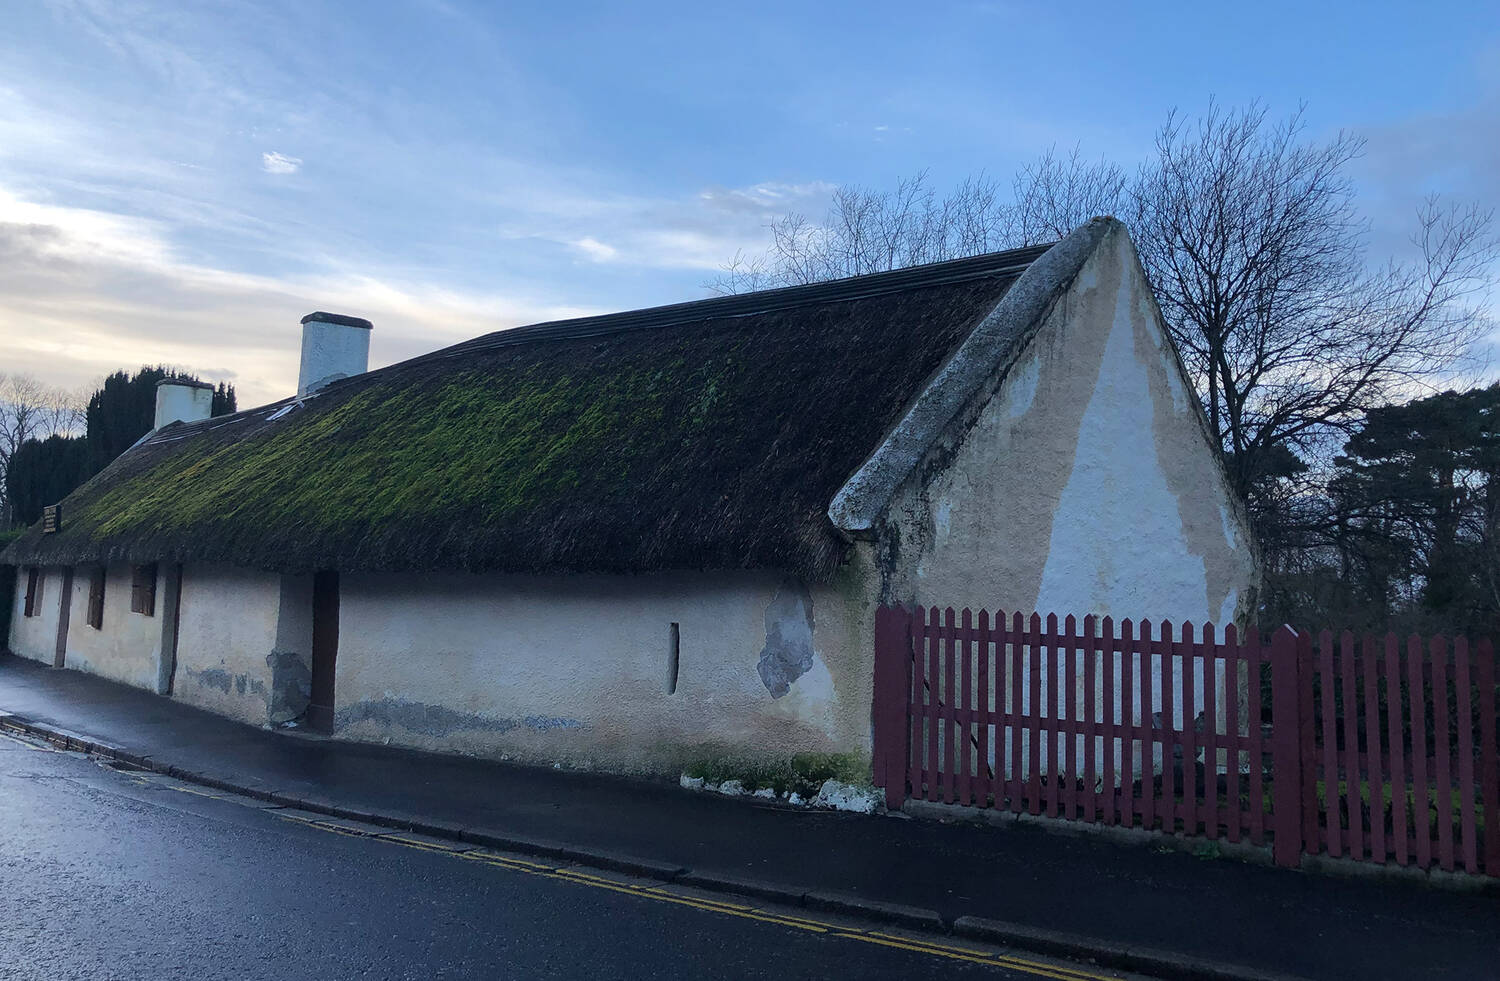 A view of the front gable end of Burns Cottage, which shows a lot of moss growing on the thatched roof and bad orange staining on the white stone walls.